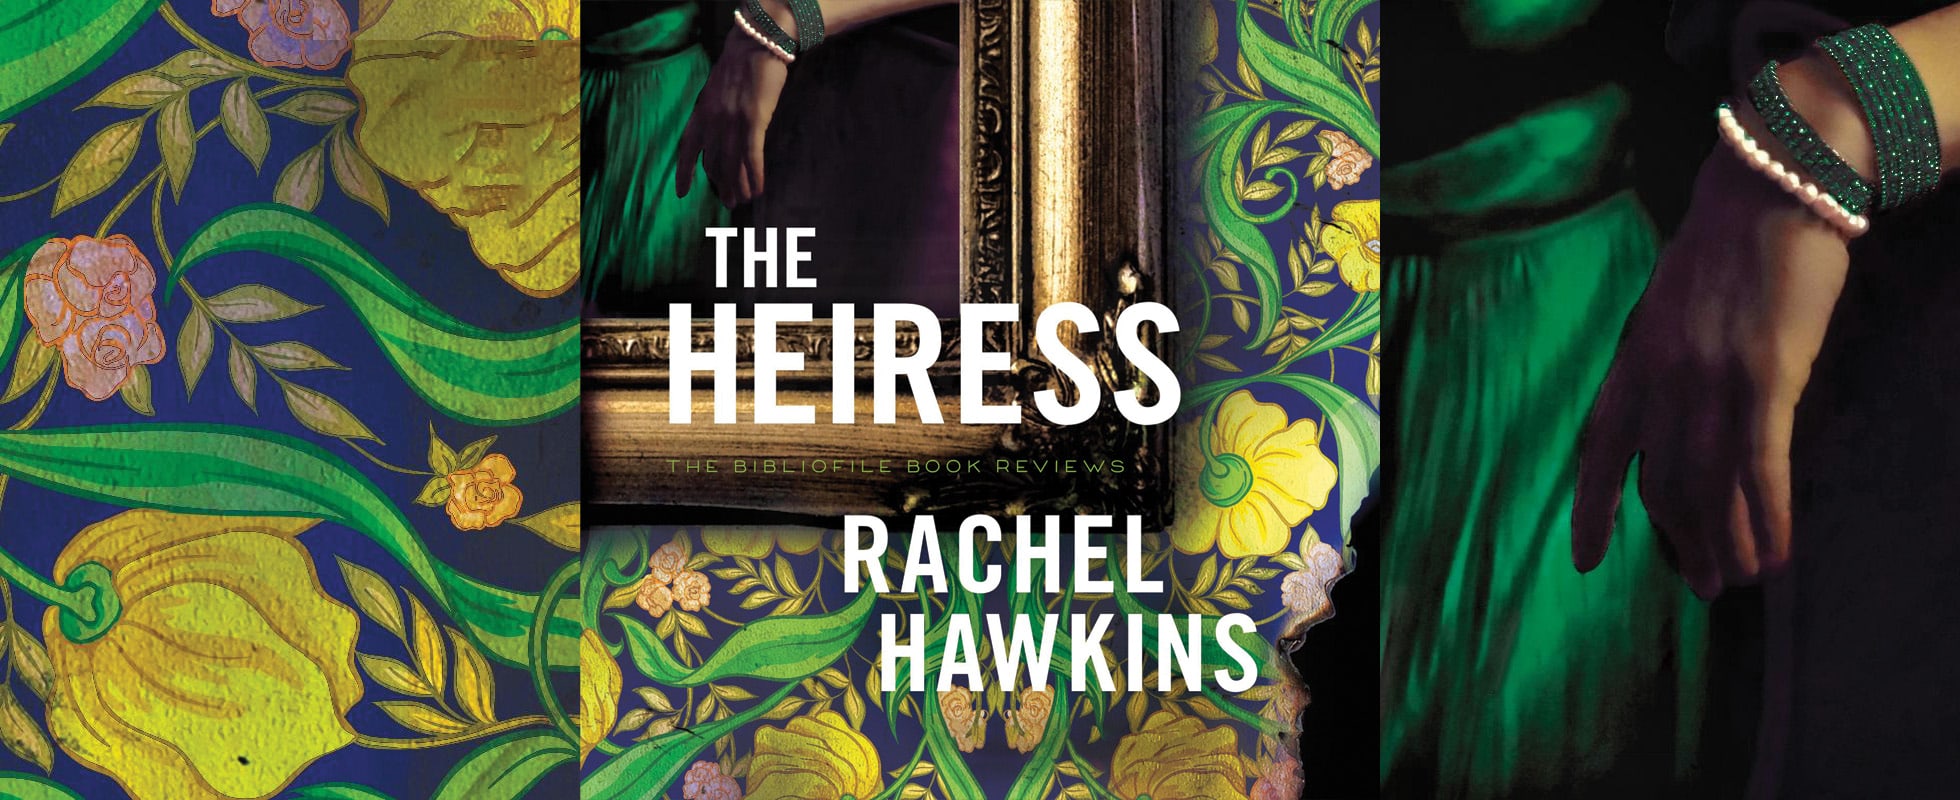 the heiress by rachel hawkins book review plot summary synopsis recap discussion spoilers